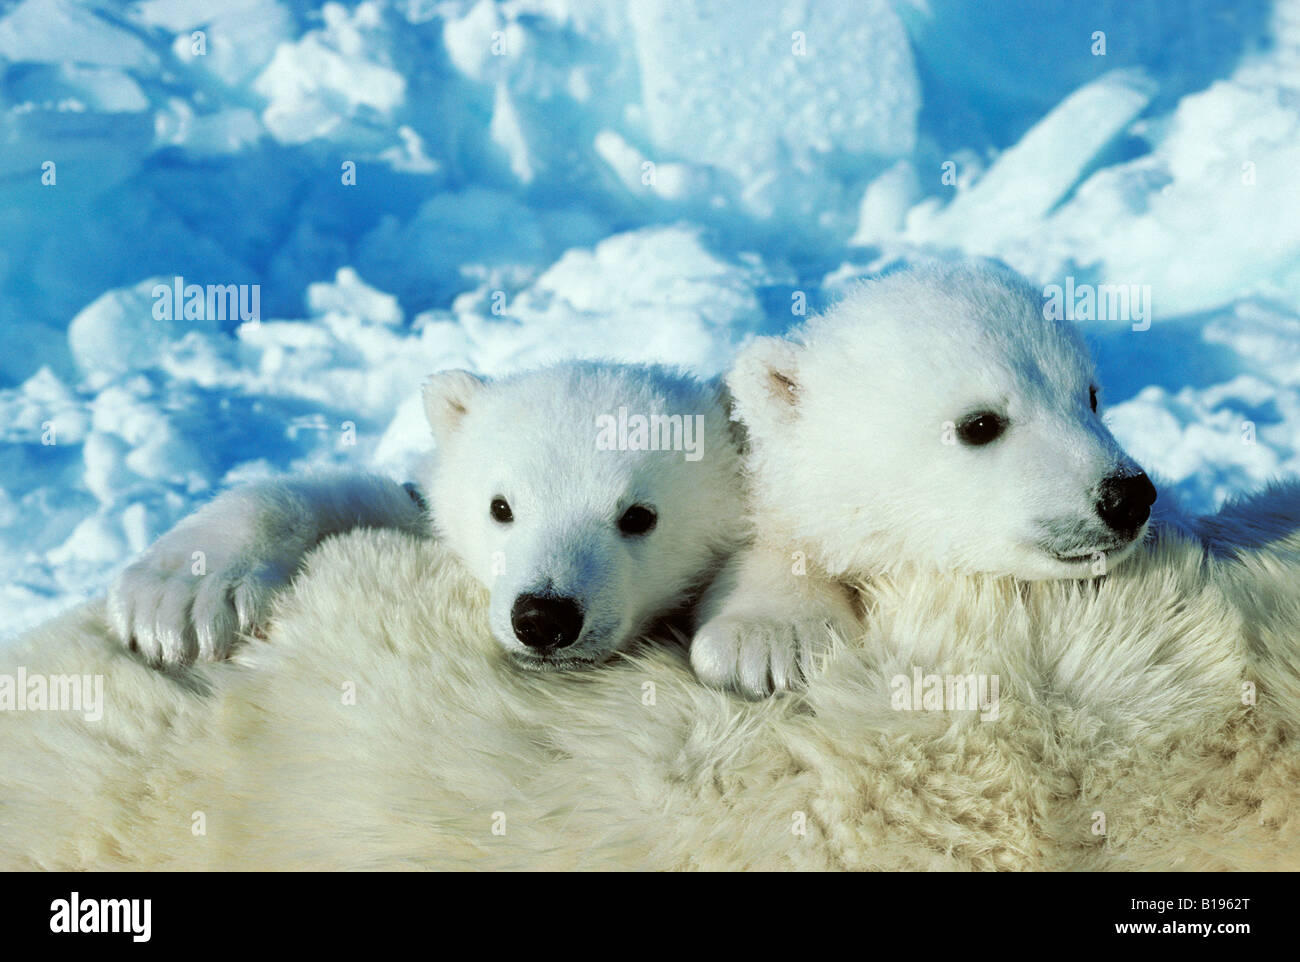 Three-month old polar bear cubs (Ursus maritimus) resting on their mother, Arctic Canada. Stock Photo